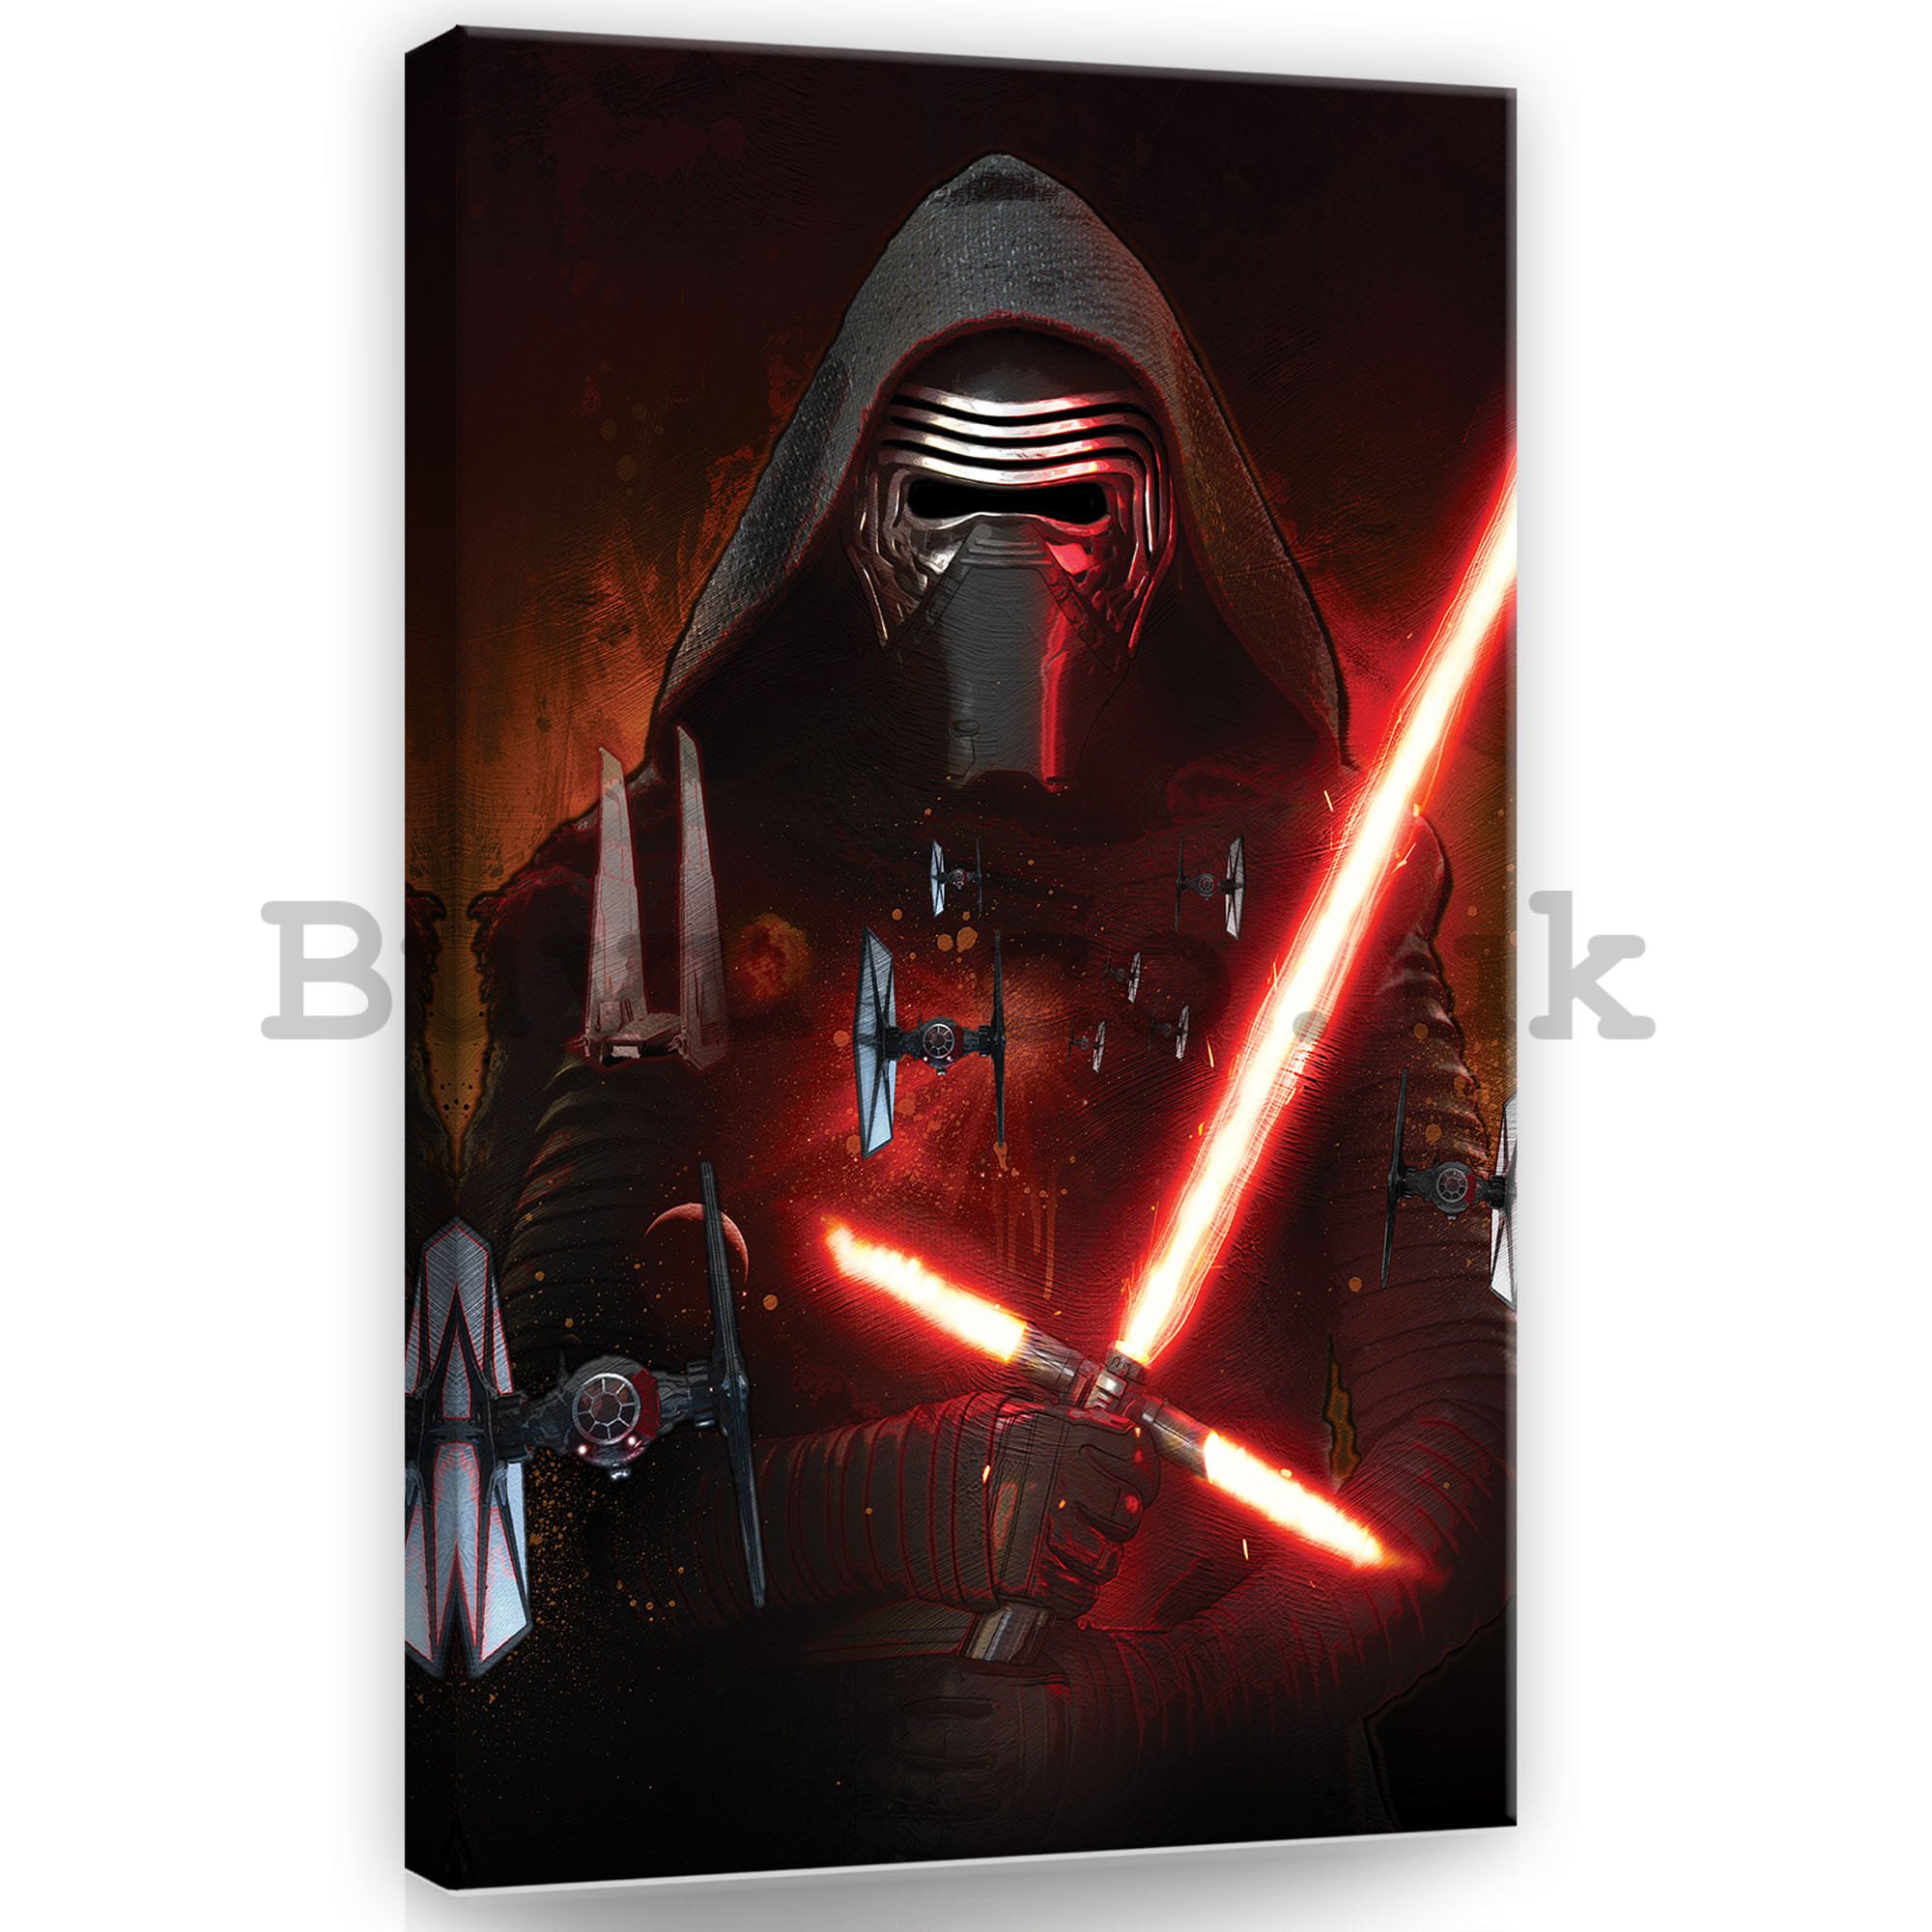 Painting on canvas: Star Wars Kylo Ren & TIE fighters - 40x60 cm